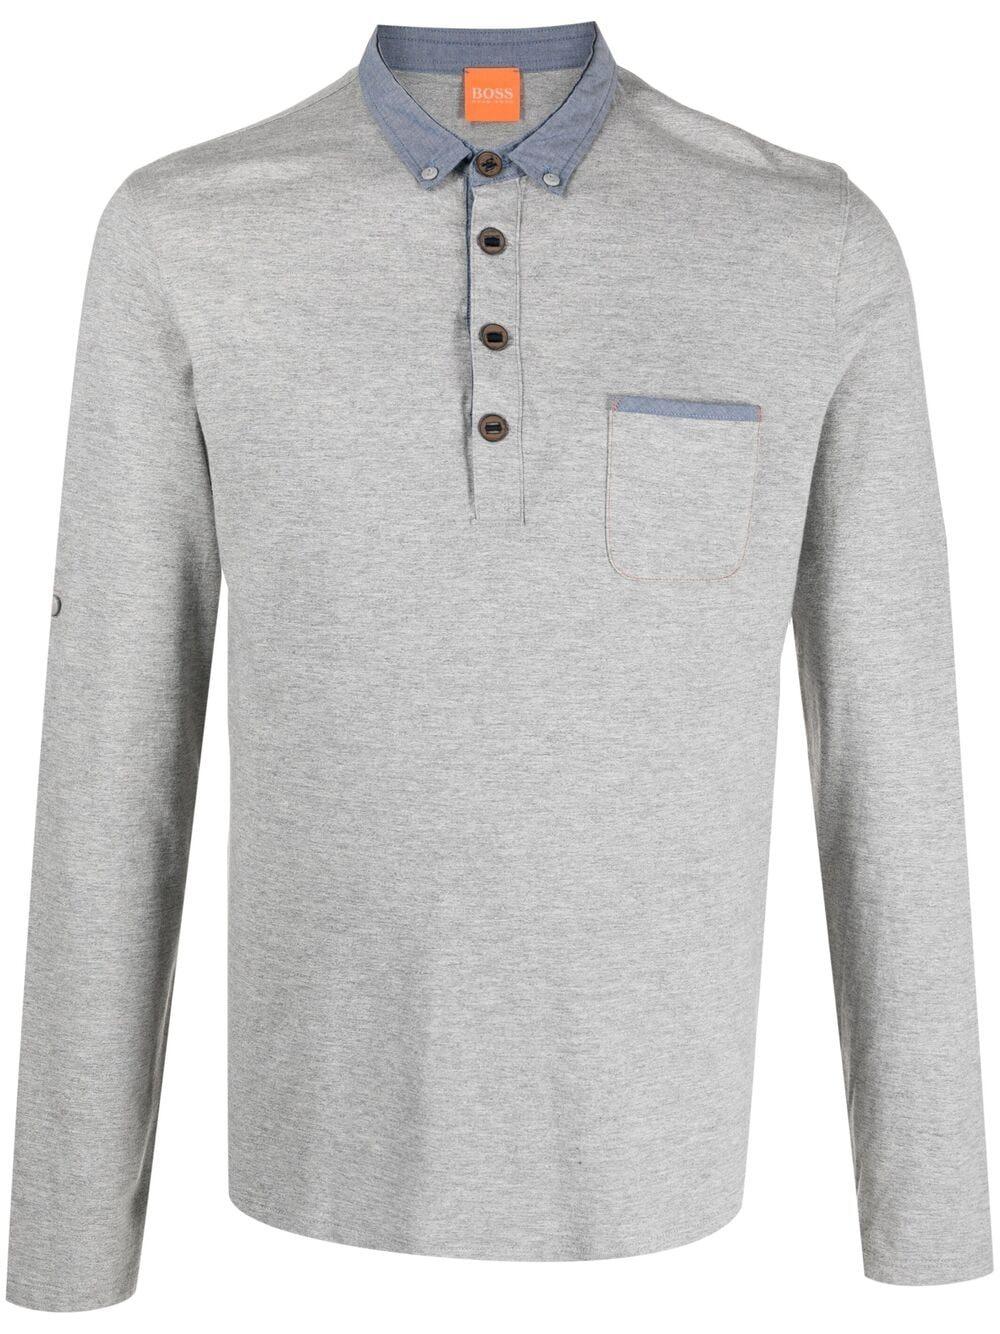 BOSS by HUGO BOSS Cotton Long-sleeve Polo Shirt in Grey (Grey) for Men -  Lyst